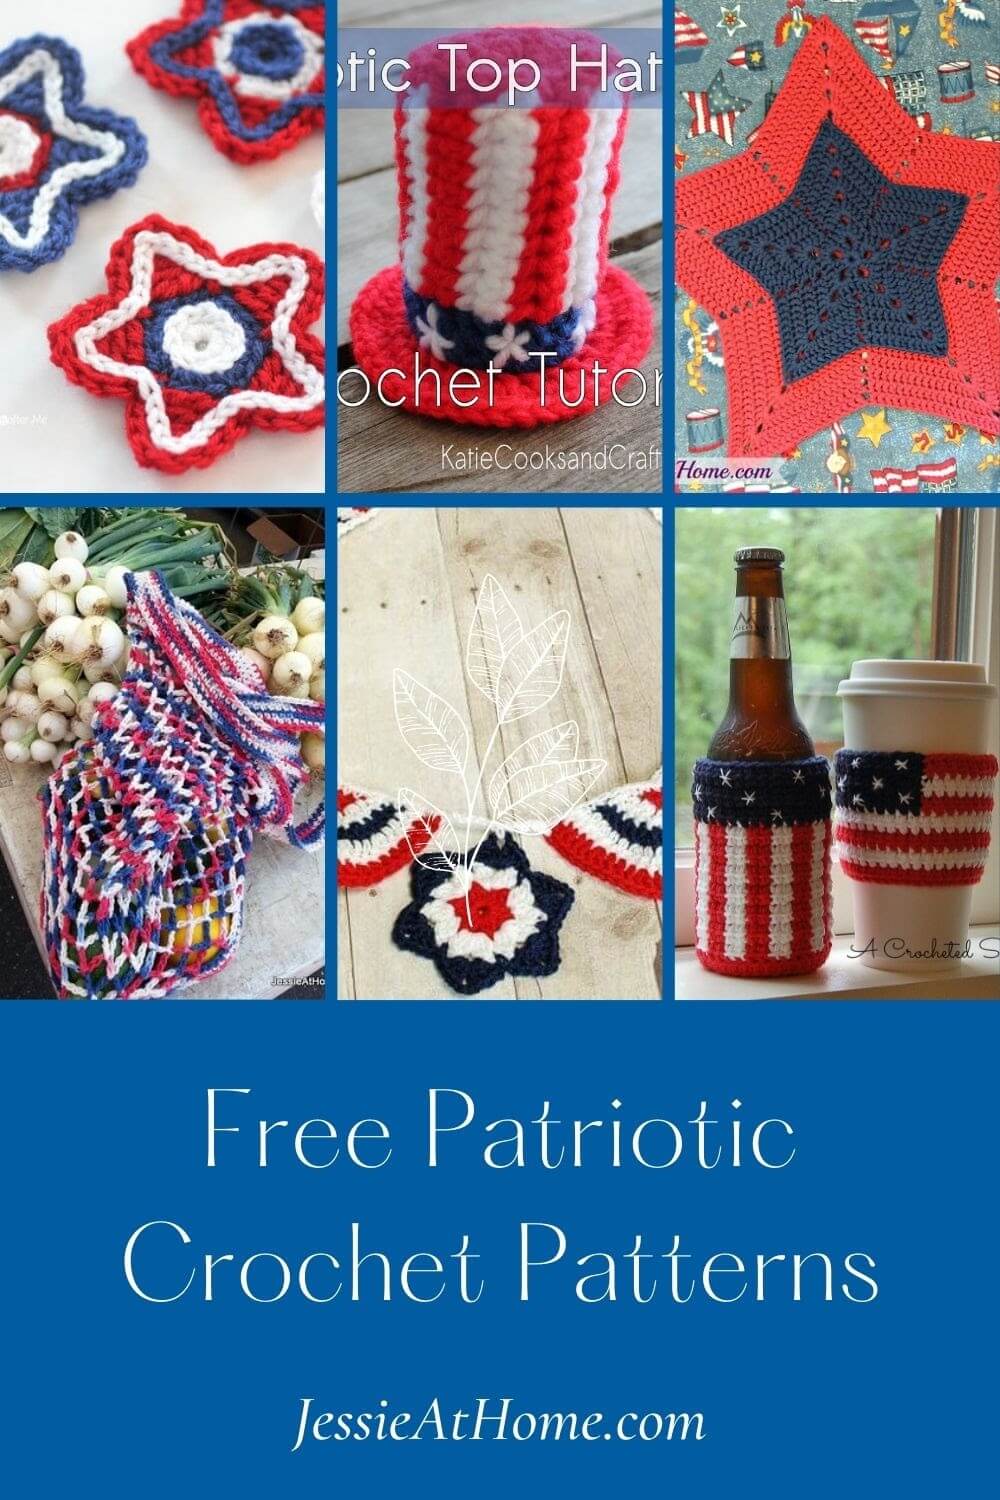 Free Patriotic Crochet Patterns round up by Jessie At Home - Pin 1